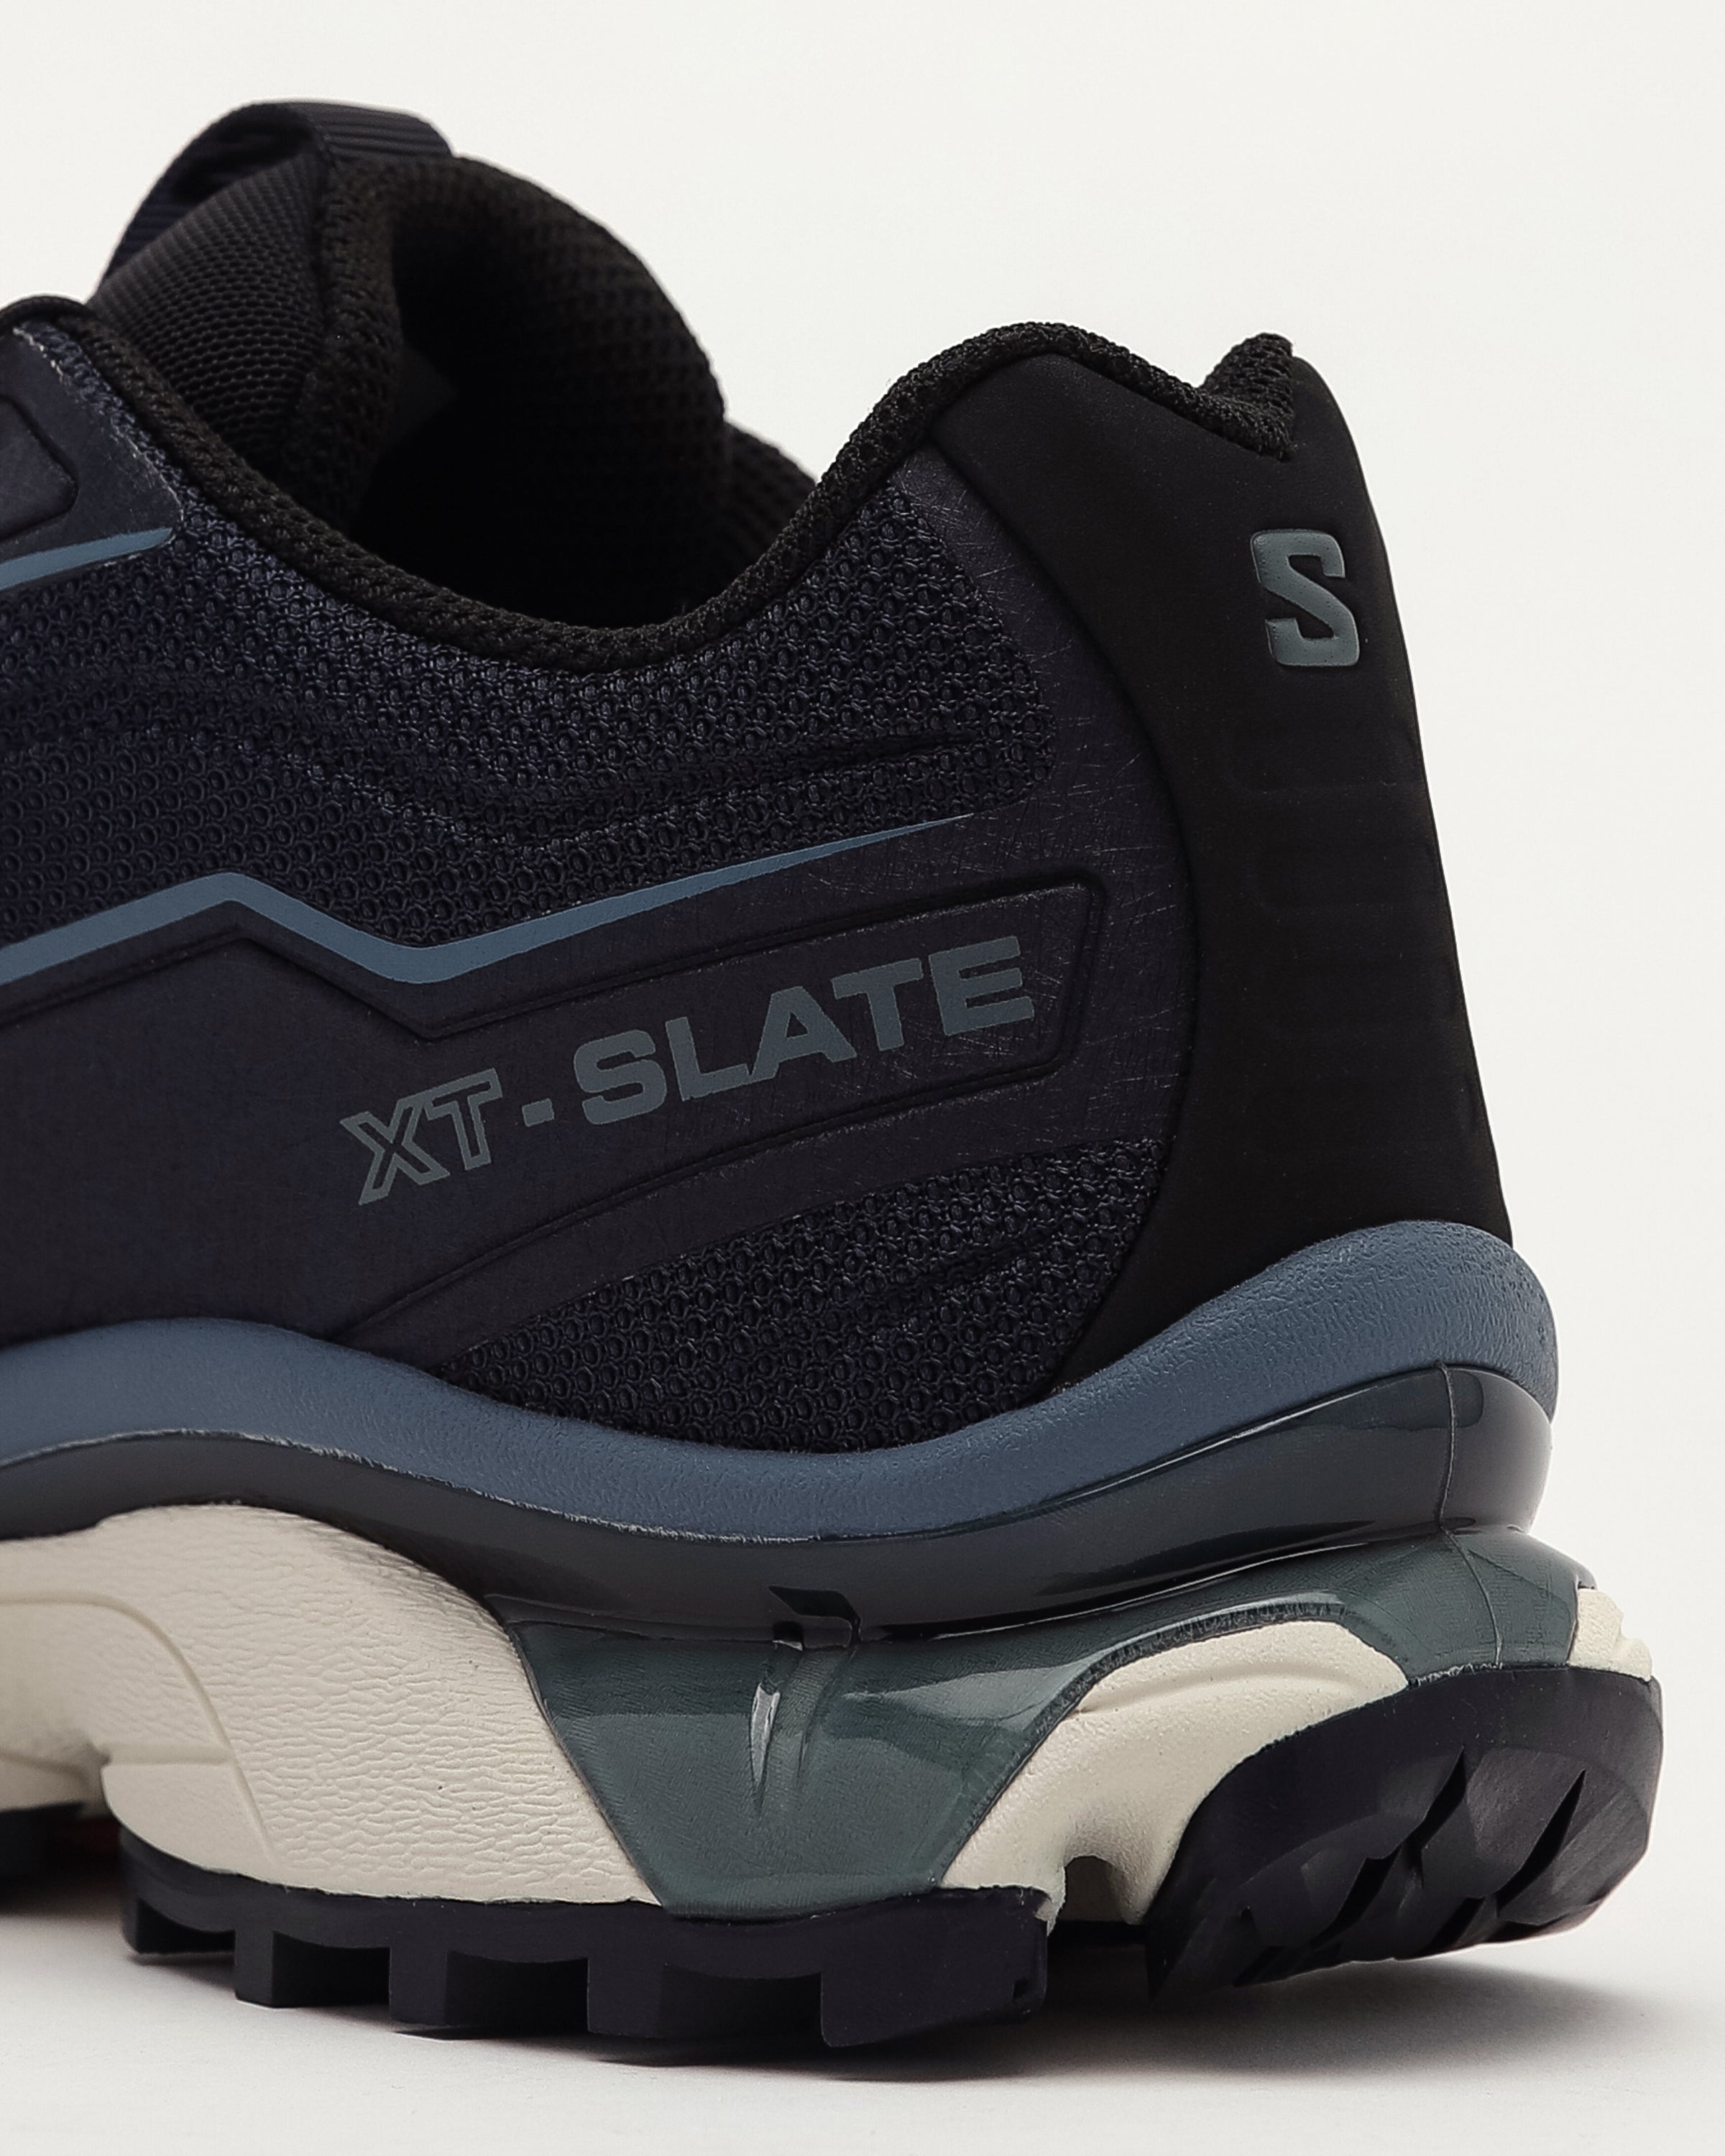 XT Slate Advanced in Dark Sapphire, Stone Blue, and Blue Ashes